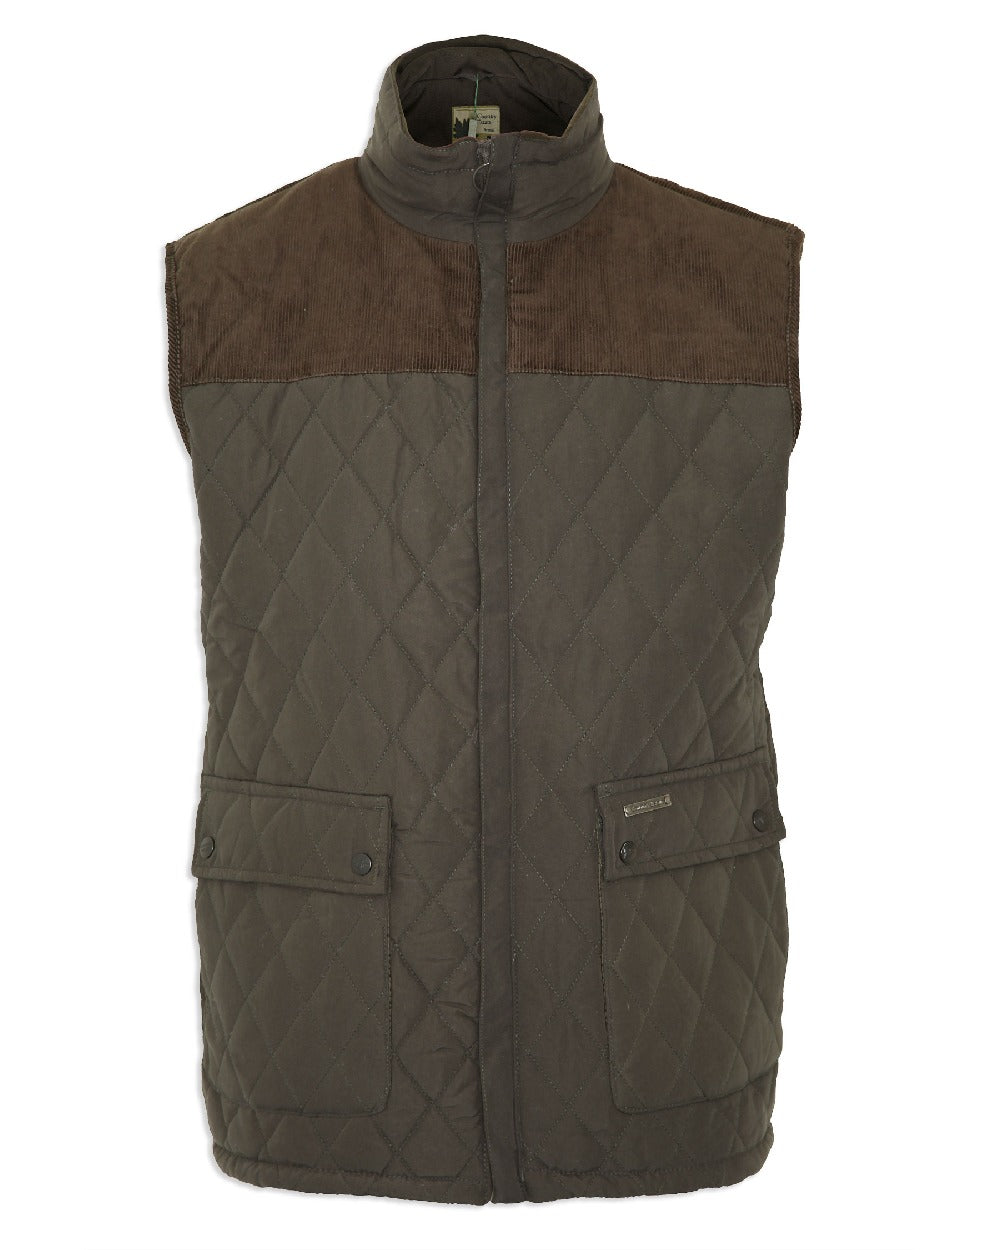 Champion Arundel Diamond Quilted Bodywarmer in Olive 